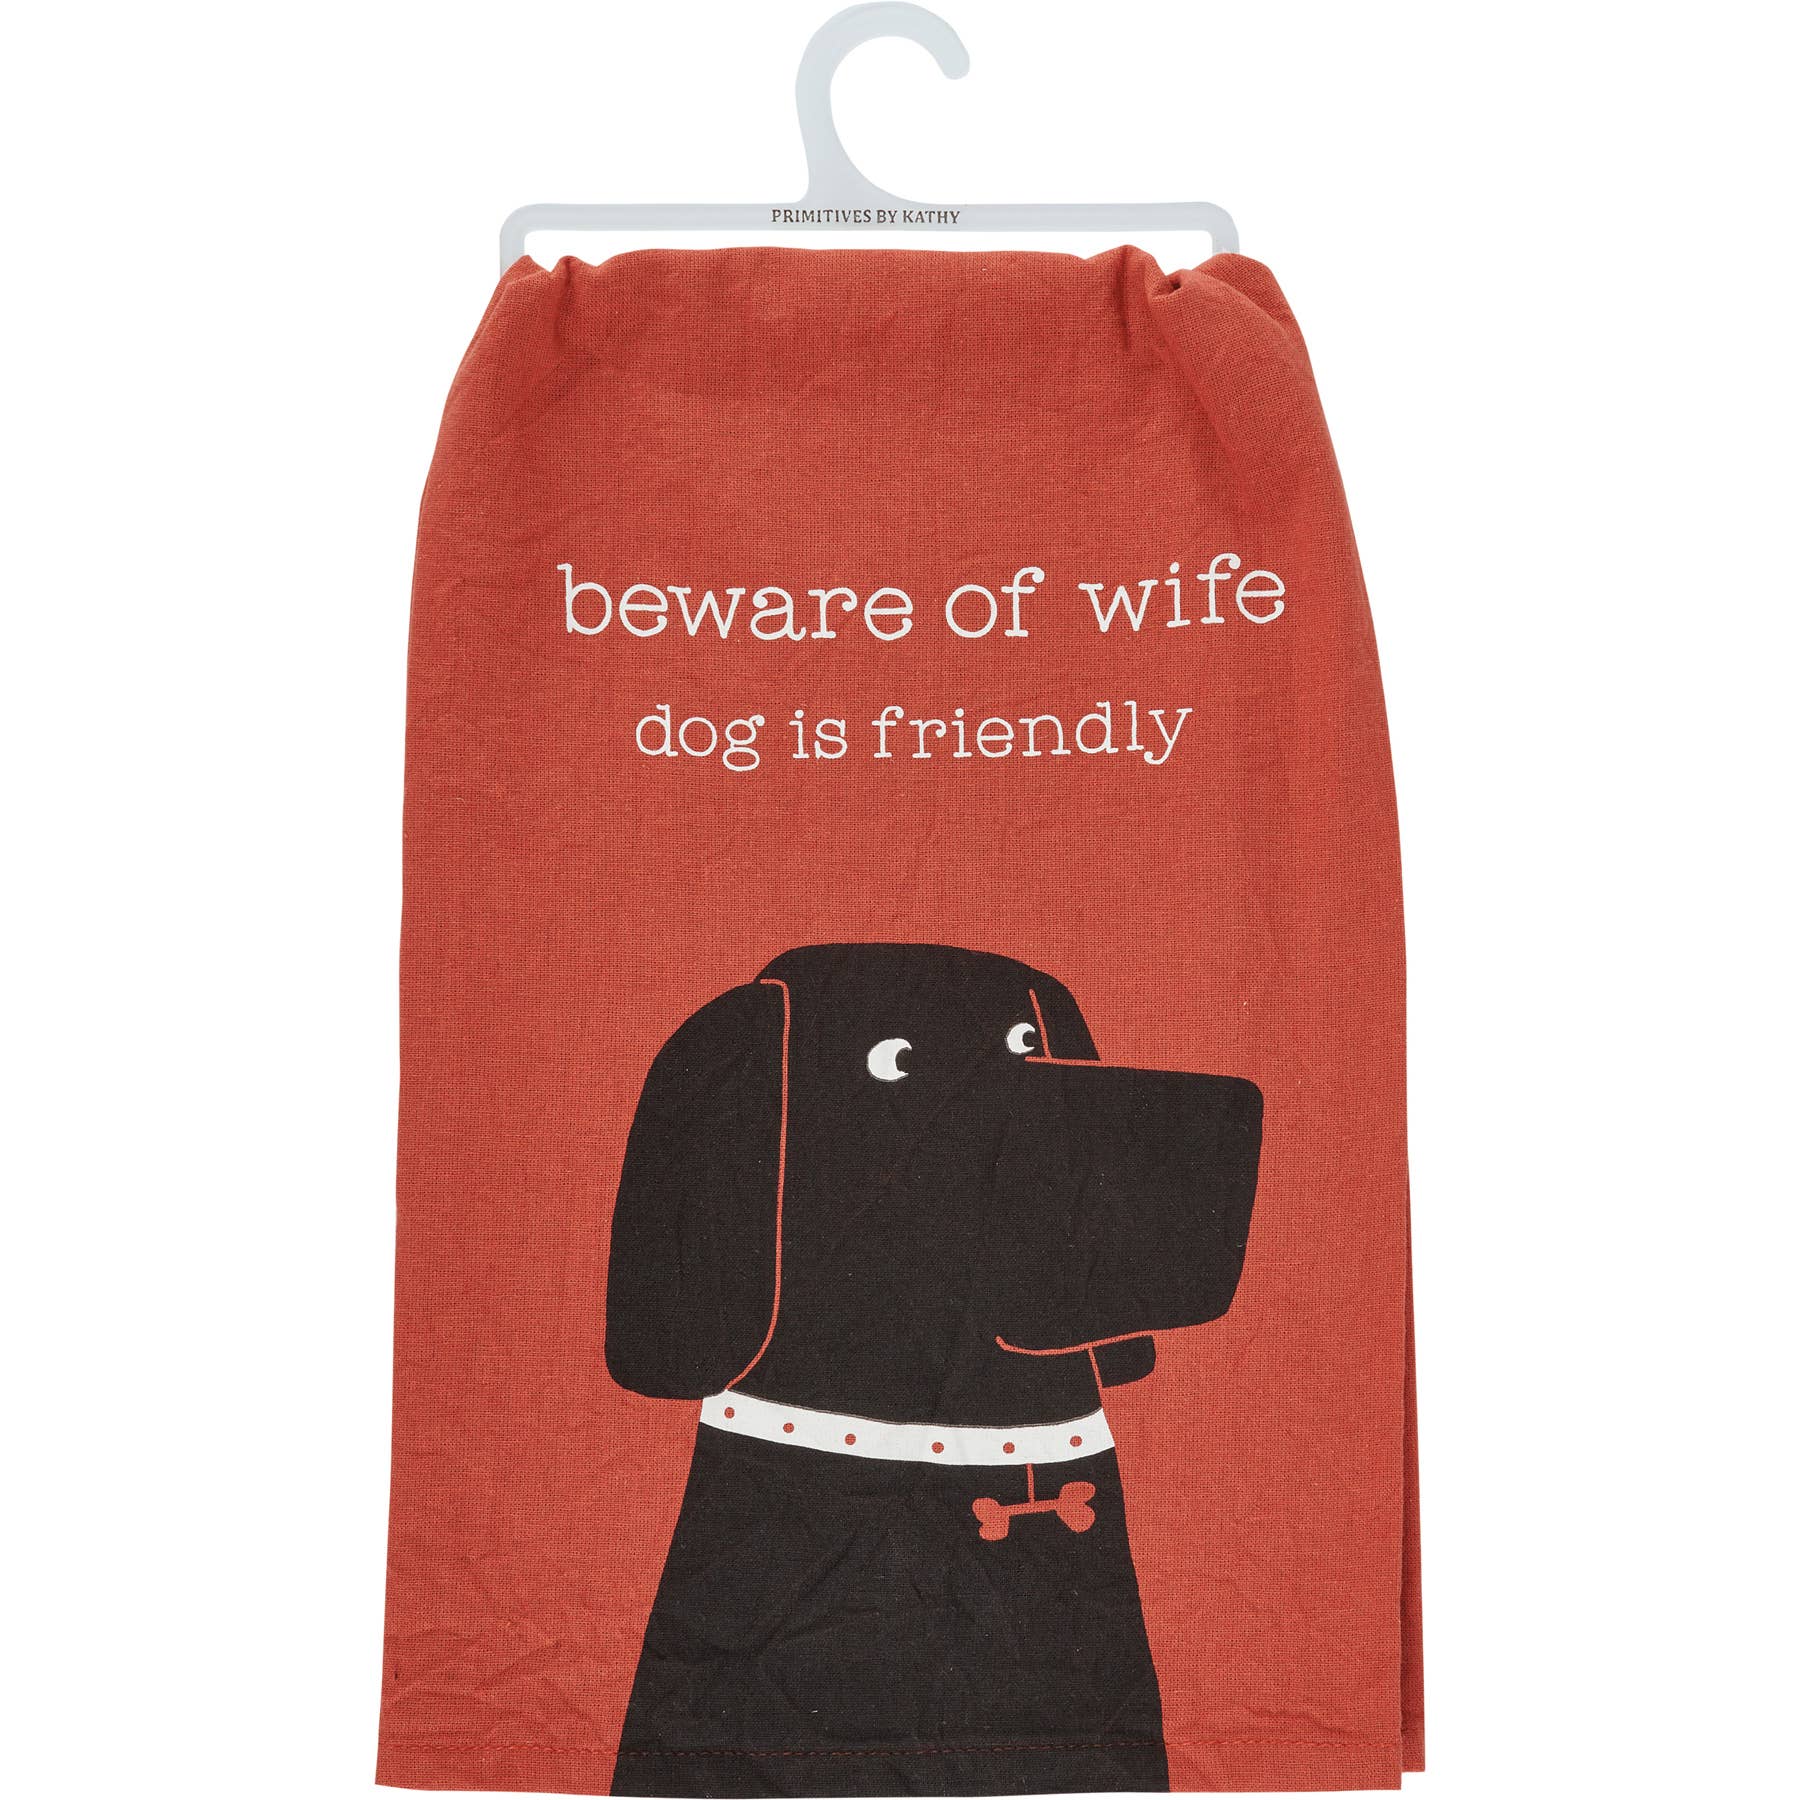 Primitives by Kathy - Dog Is Friendly Kitchen Towel